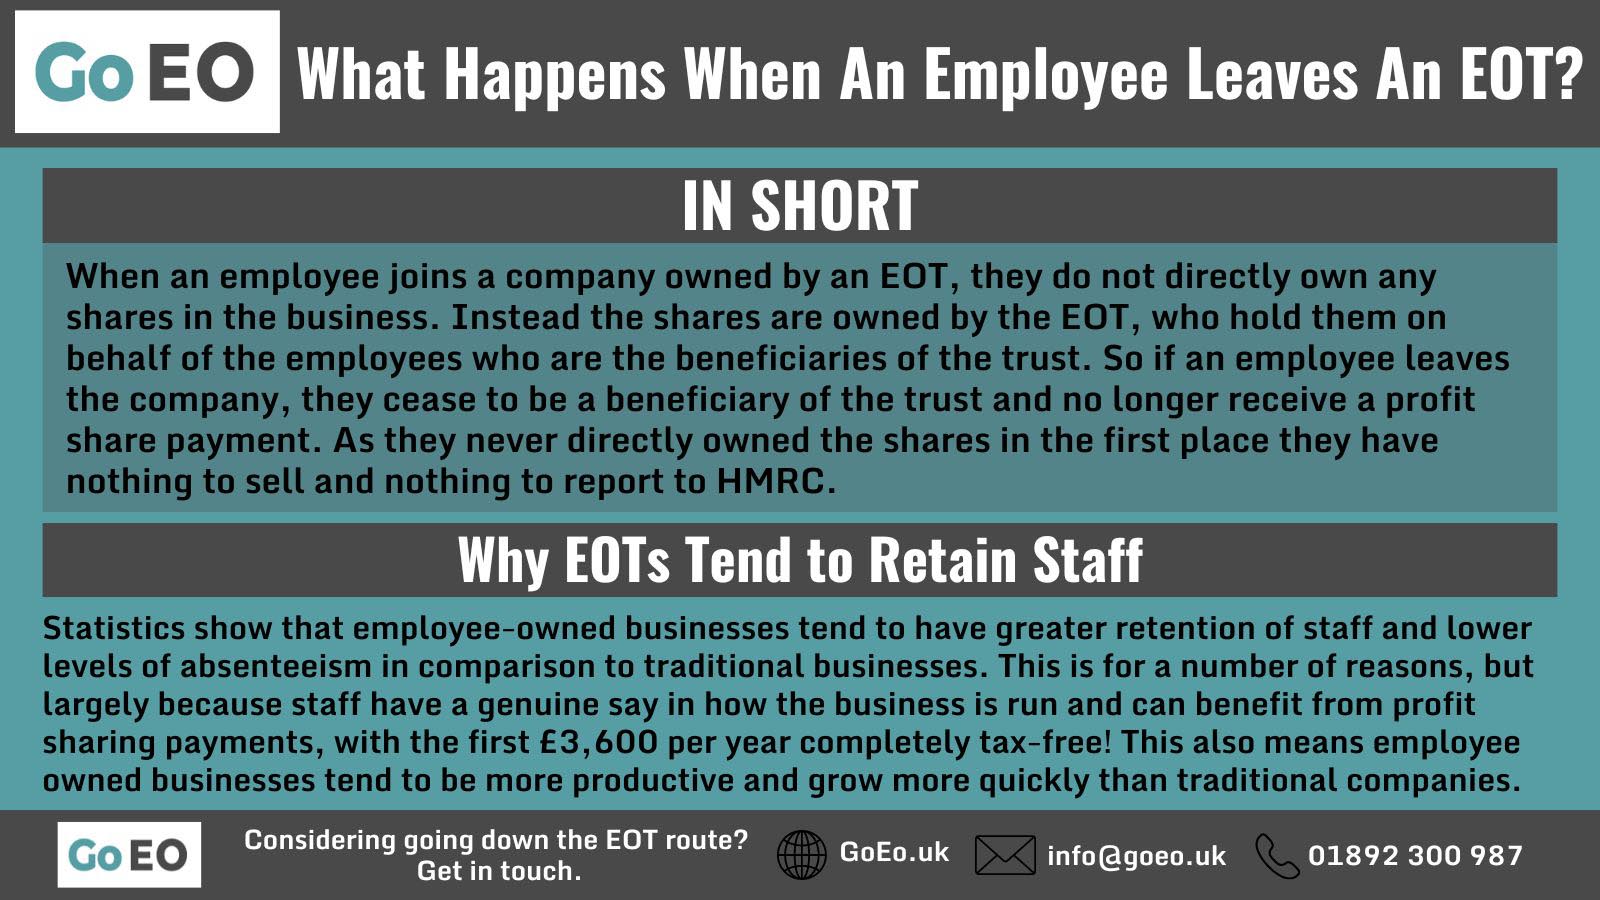 INFOGRAPHIC Explaining What Happens When An Employee Leaves an EOT